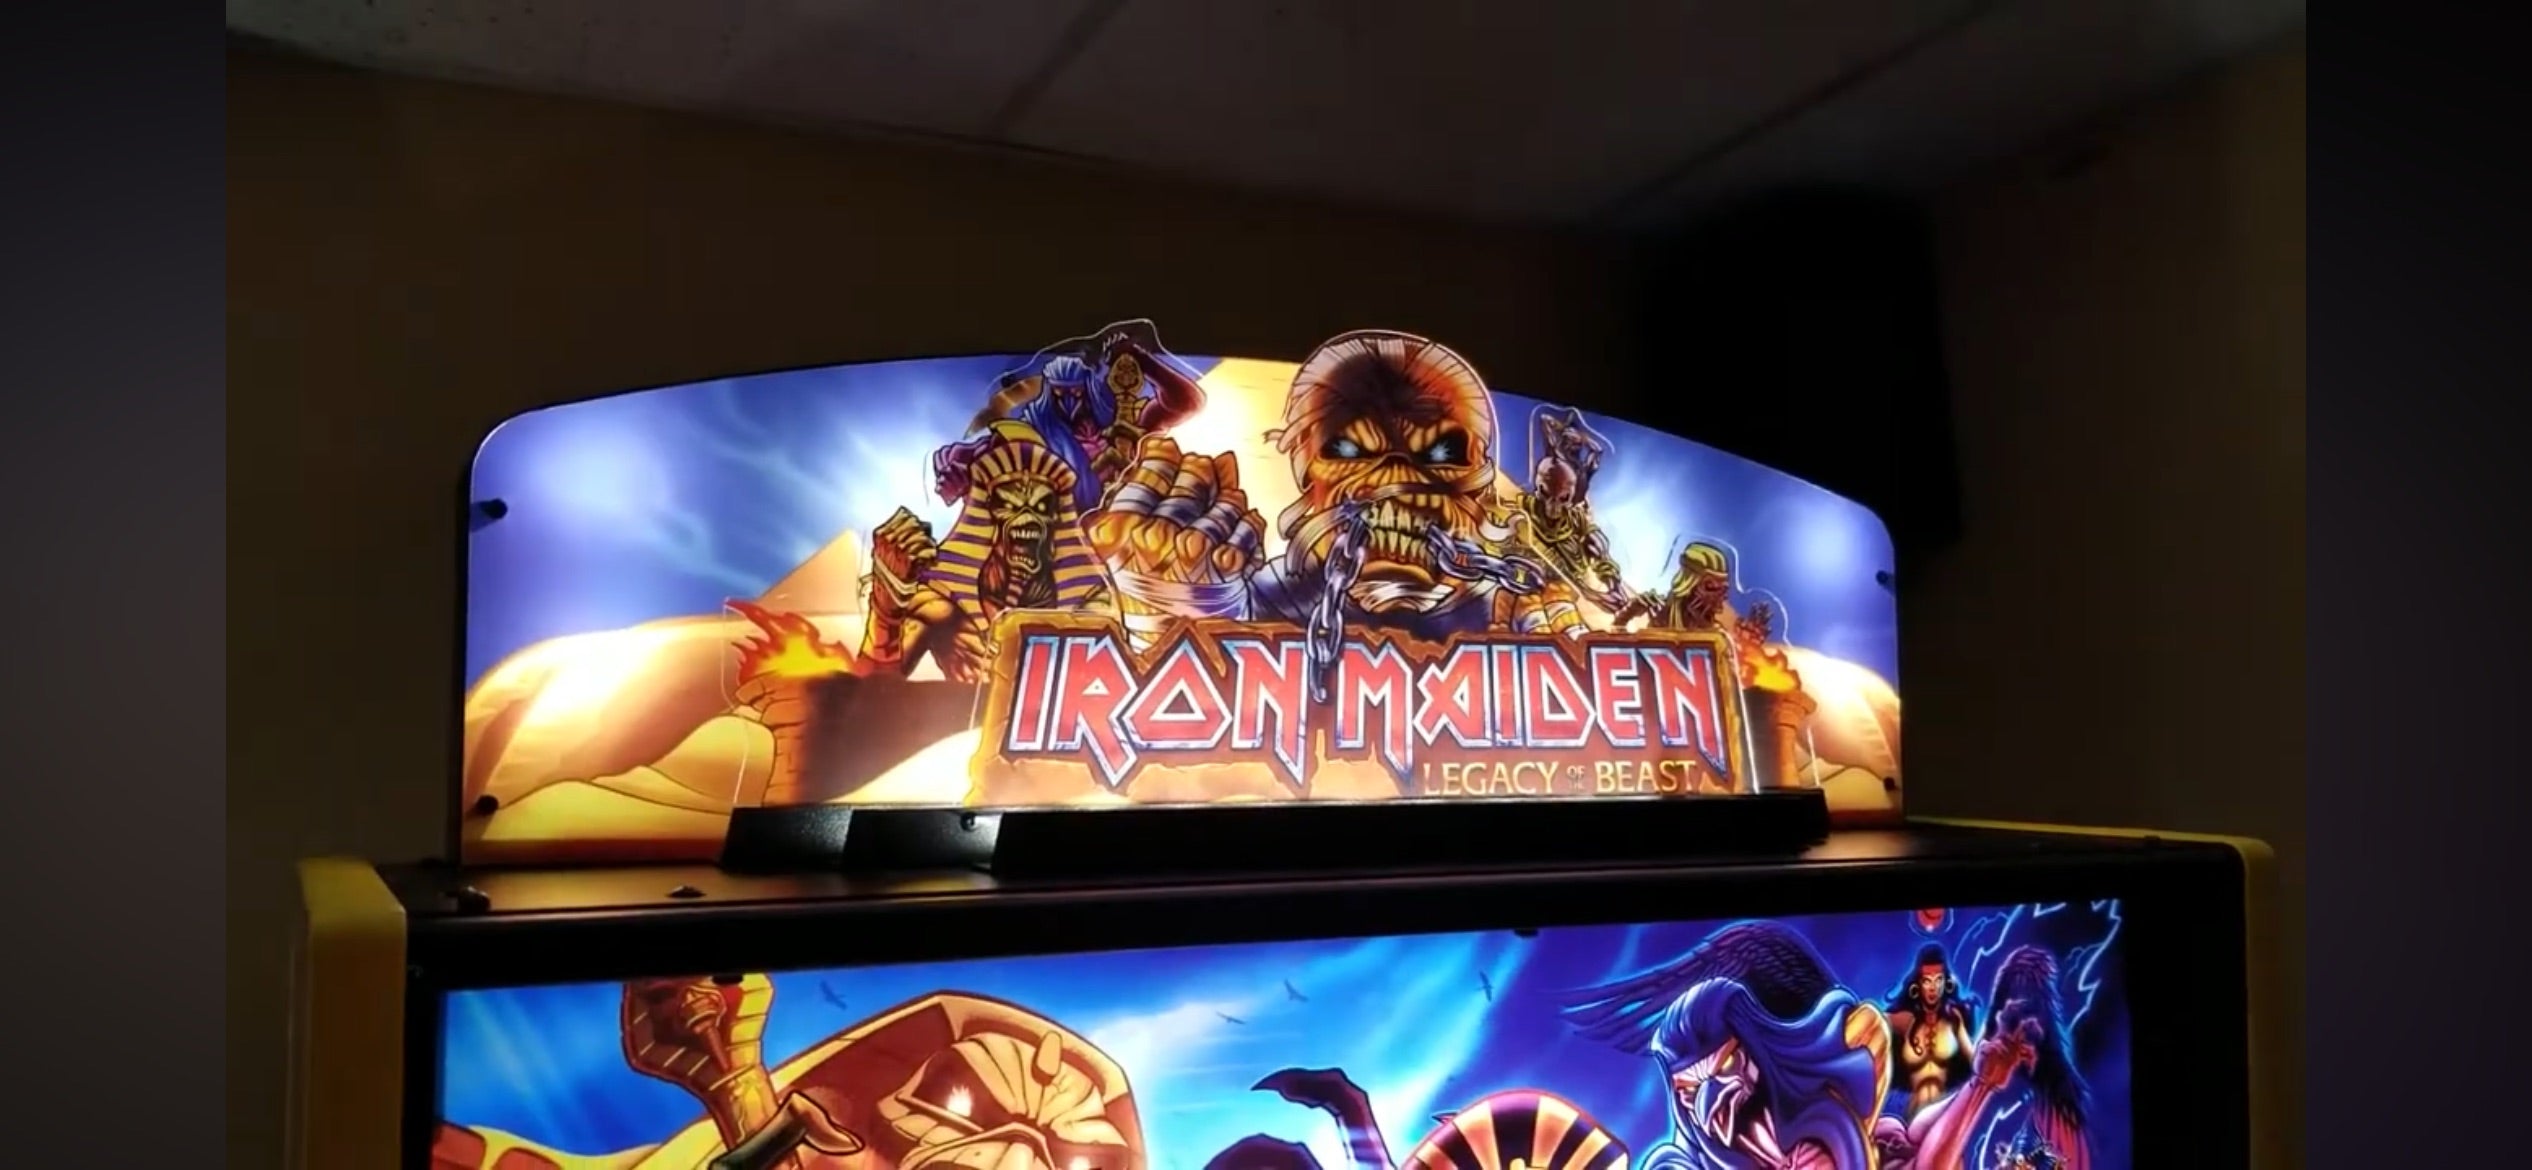 IRON MAIDEN "Aces High" Pinball Topper - IN STOCK!